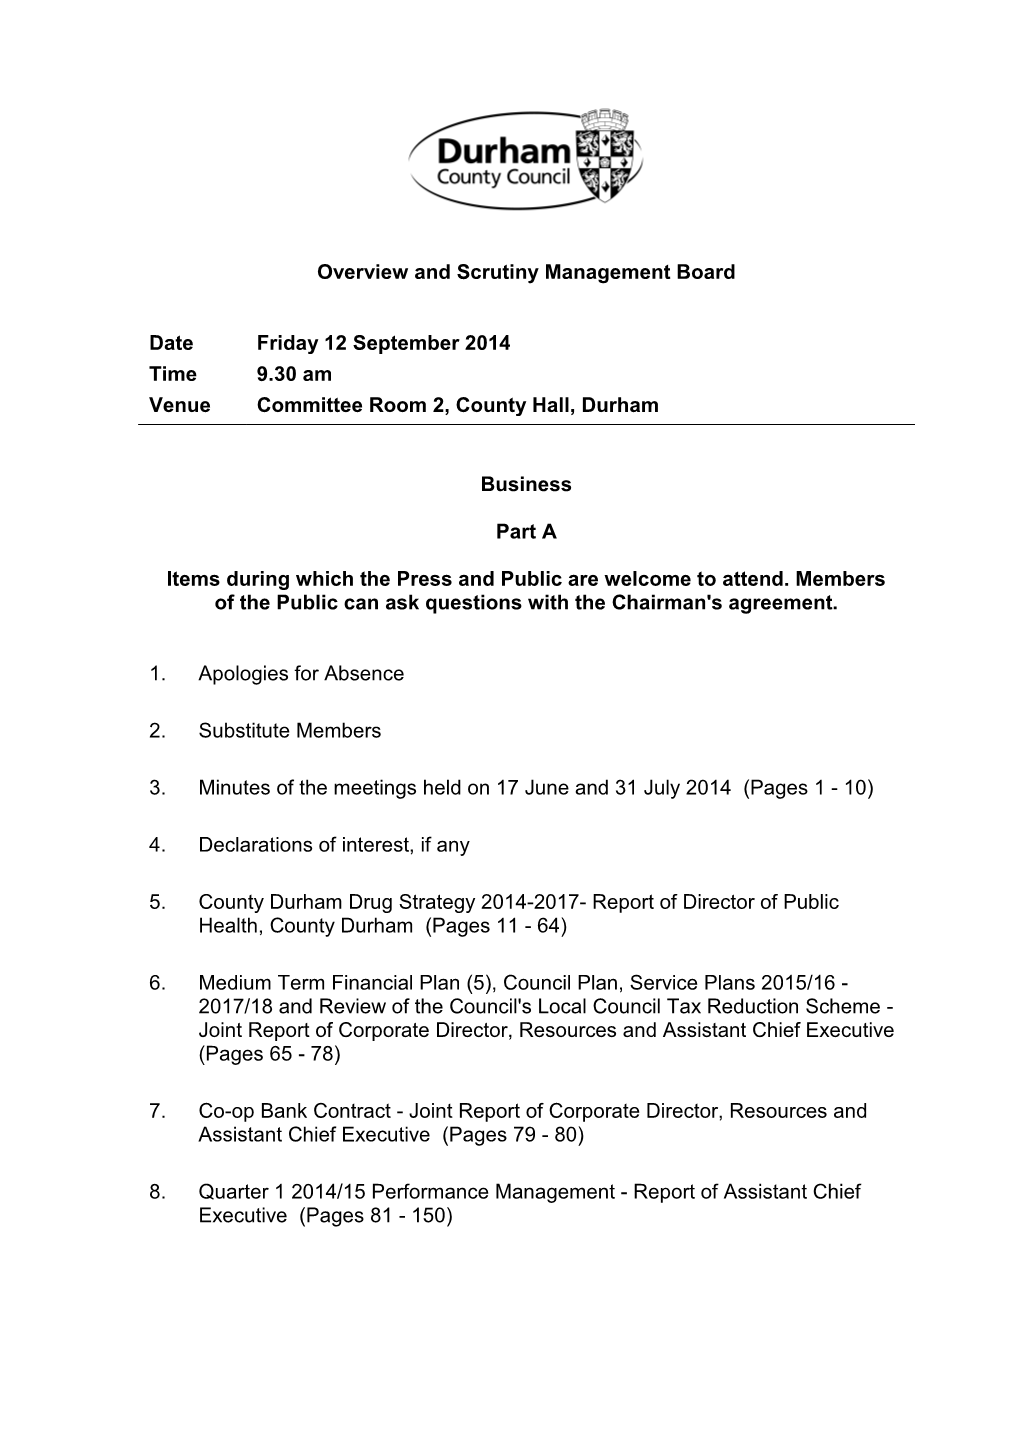 Overview and Scrutiny Management Board Date Friday 12 September 2014 Time 9.30 Am Venue Committee Room 2, County Hall, Durham Bu